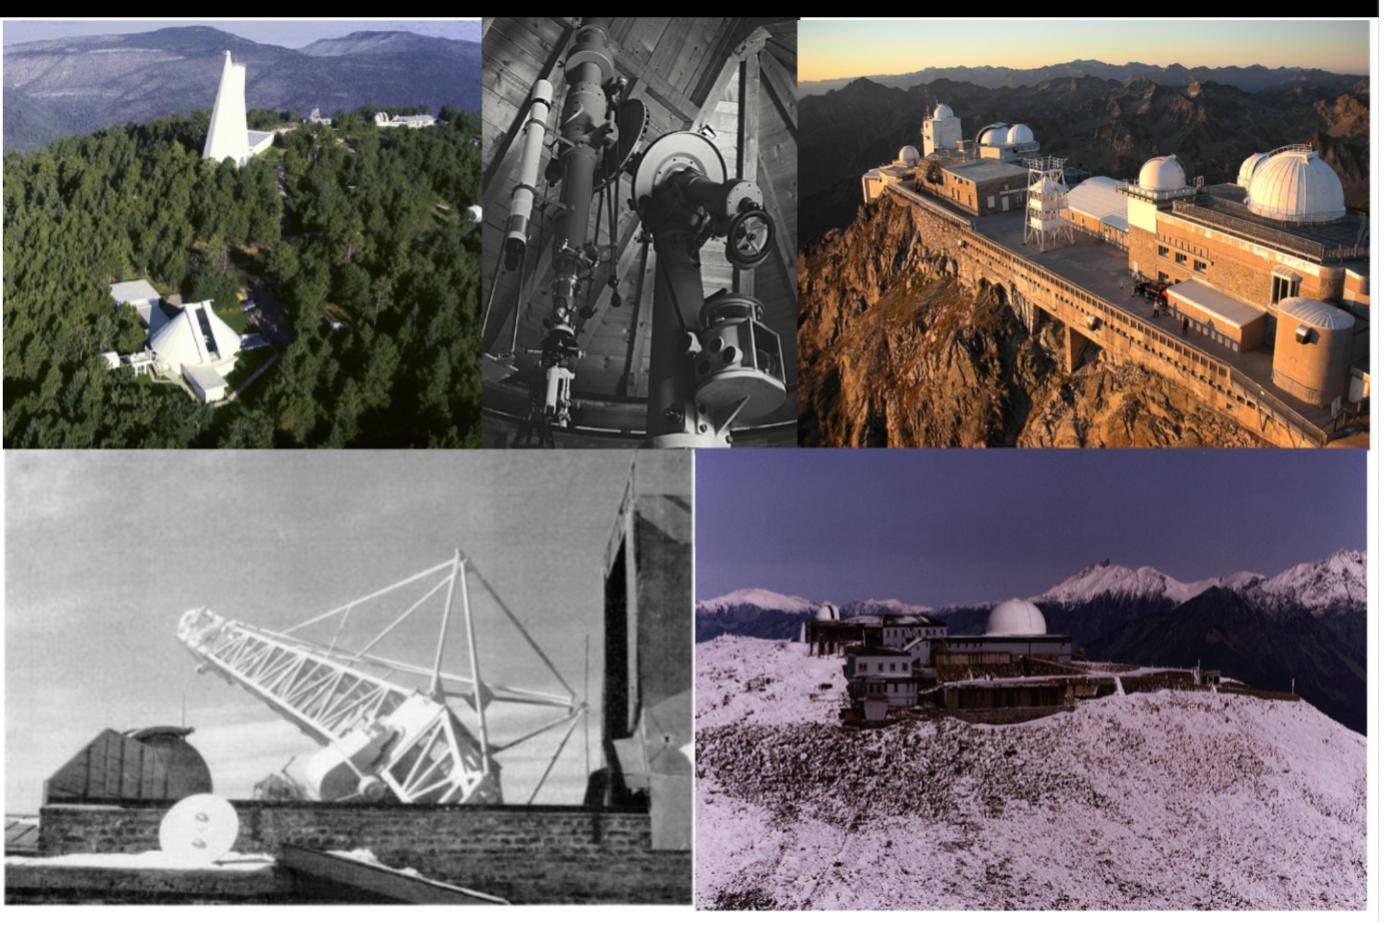 A collection of photographs. The Norikura Solar Observatory appears from the perspective of someone at high elevation. Two other photgraphs are two pieces of equipment used by the observatory.